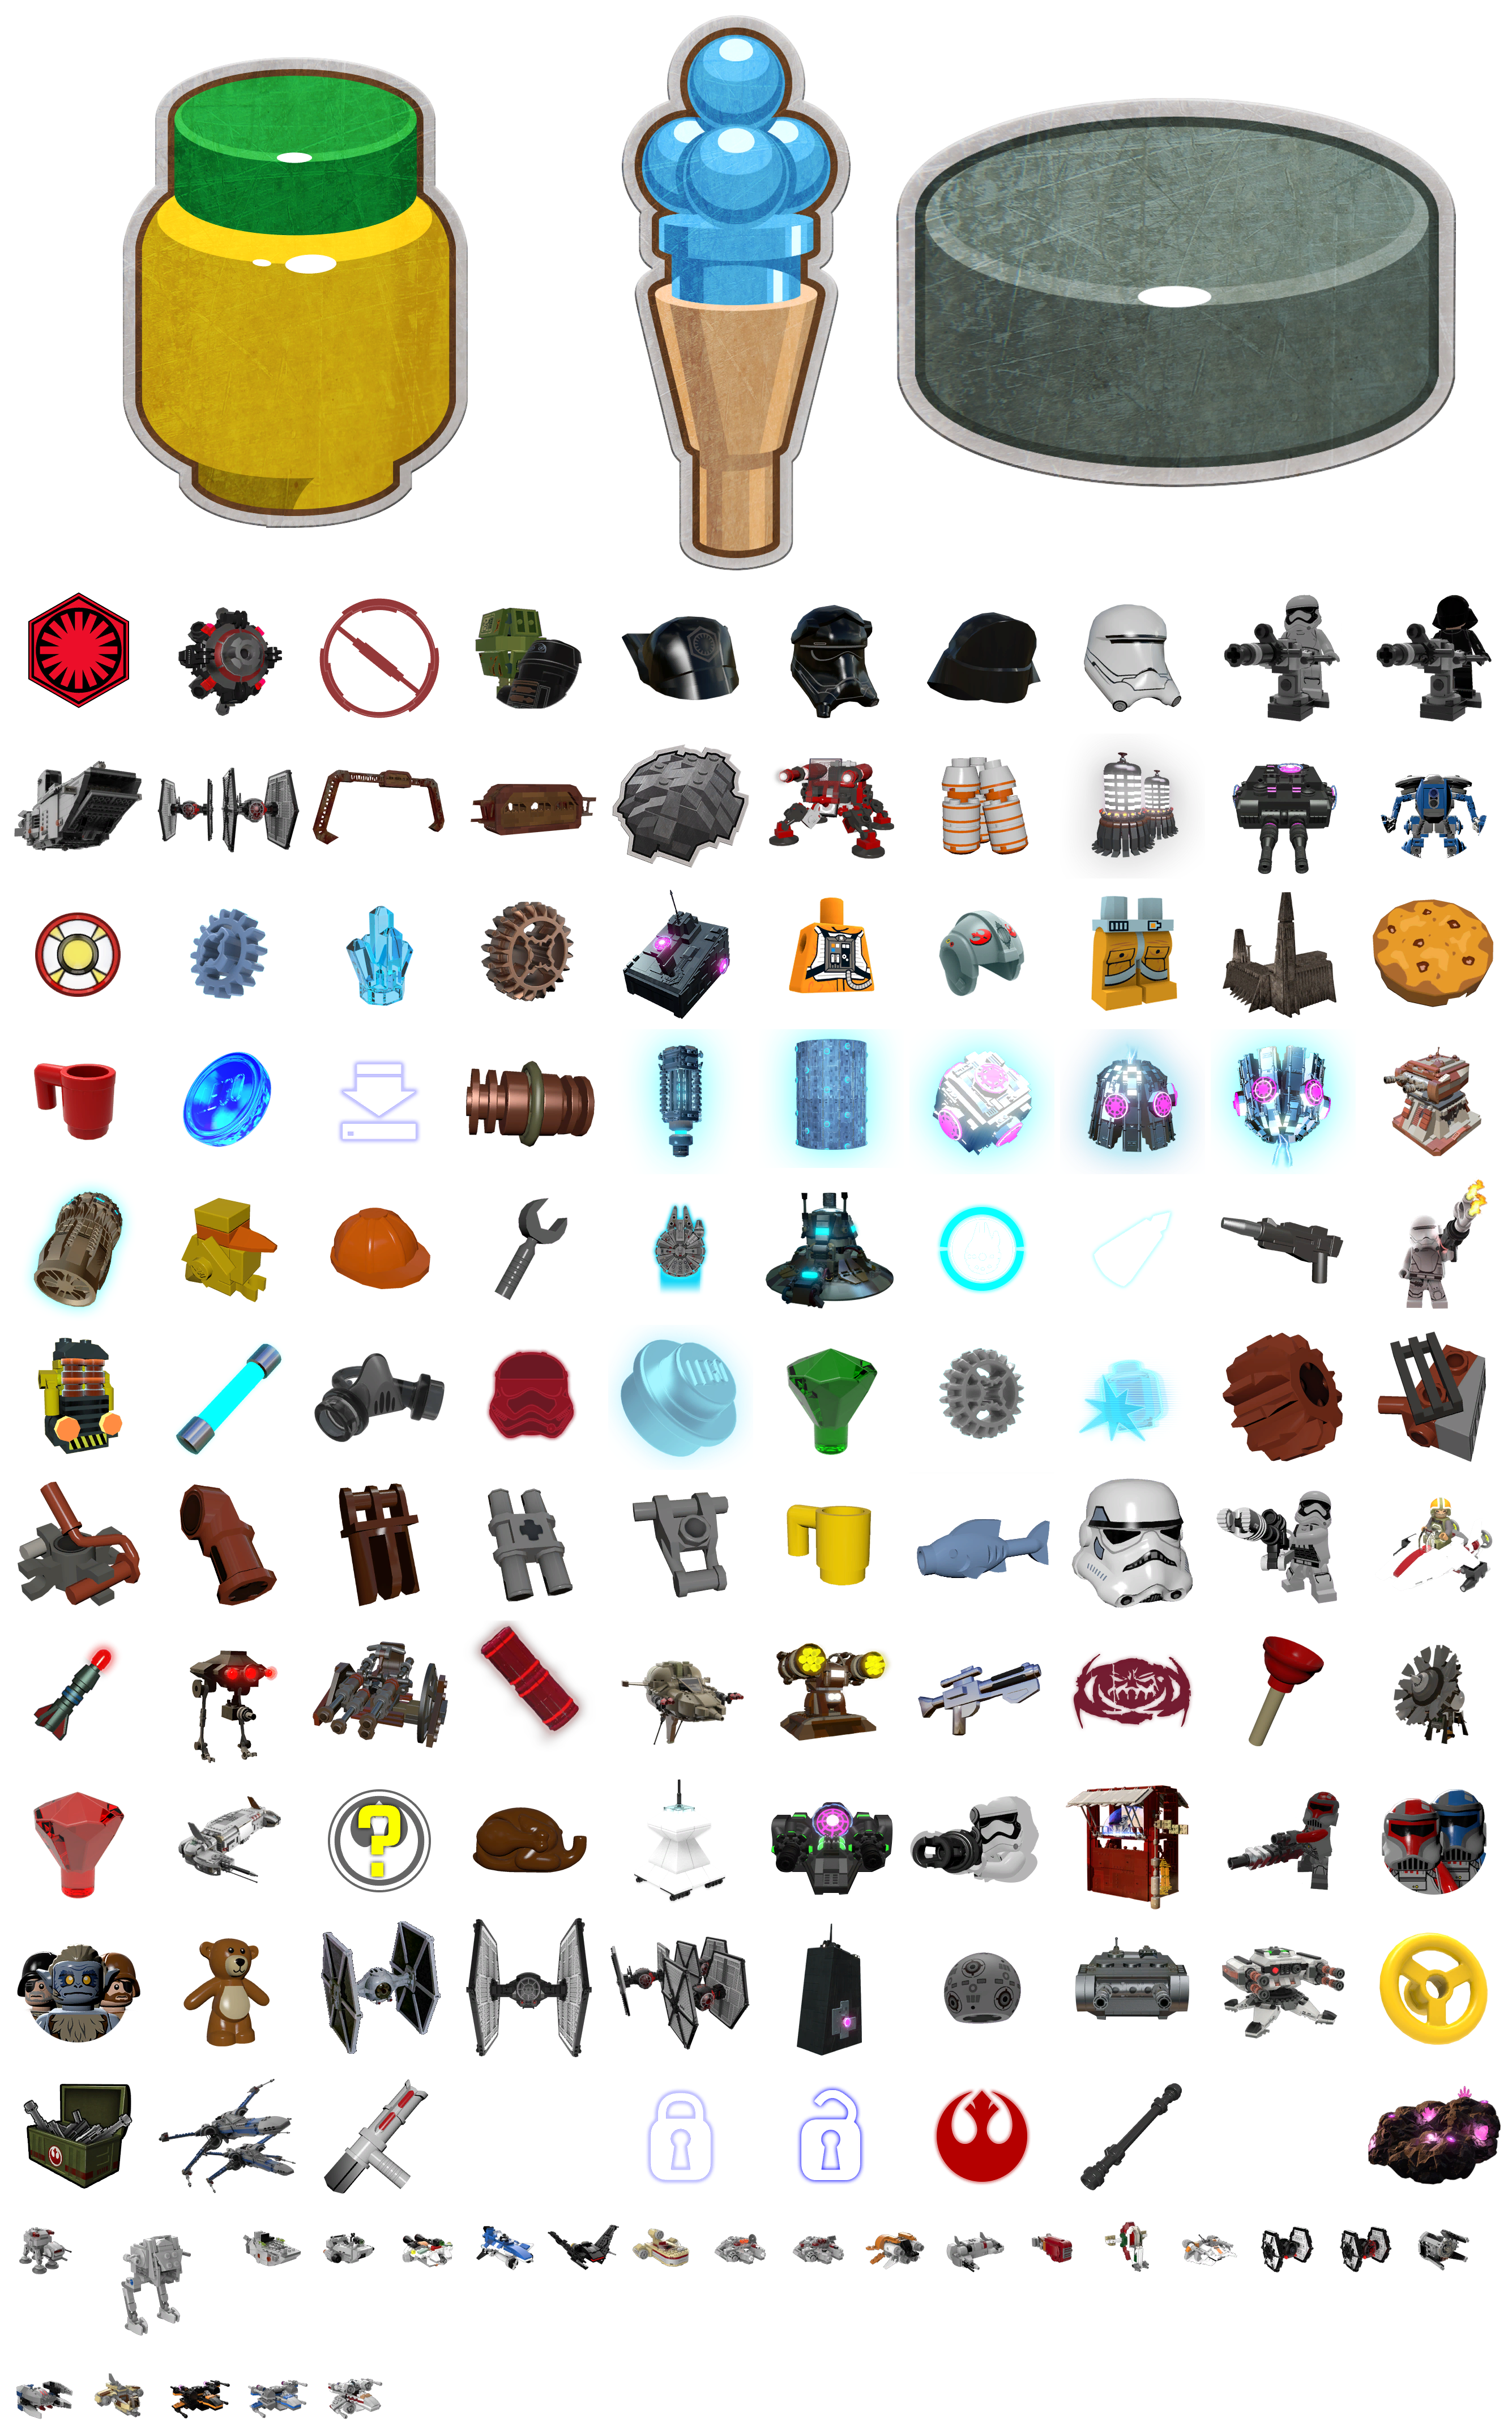 LEGO Star Wars: The Force Awakens - Items